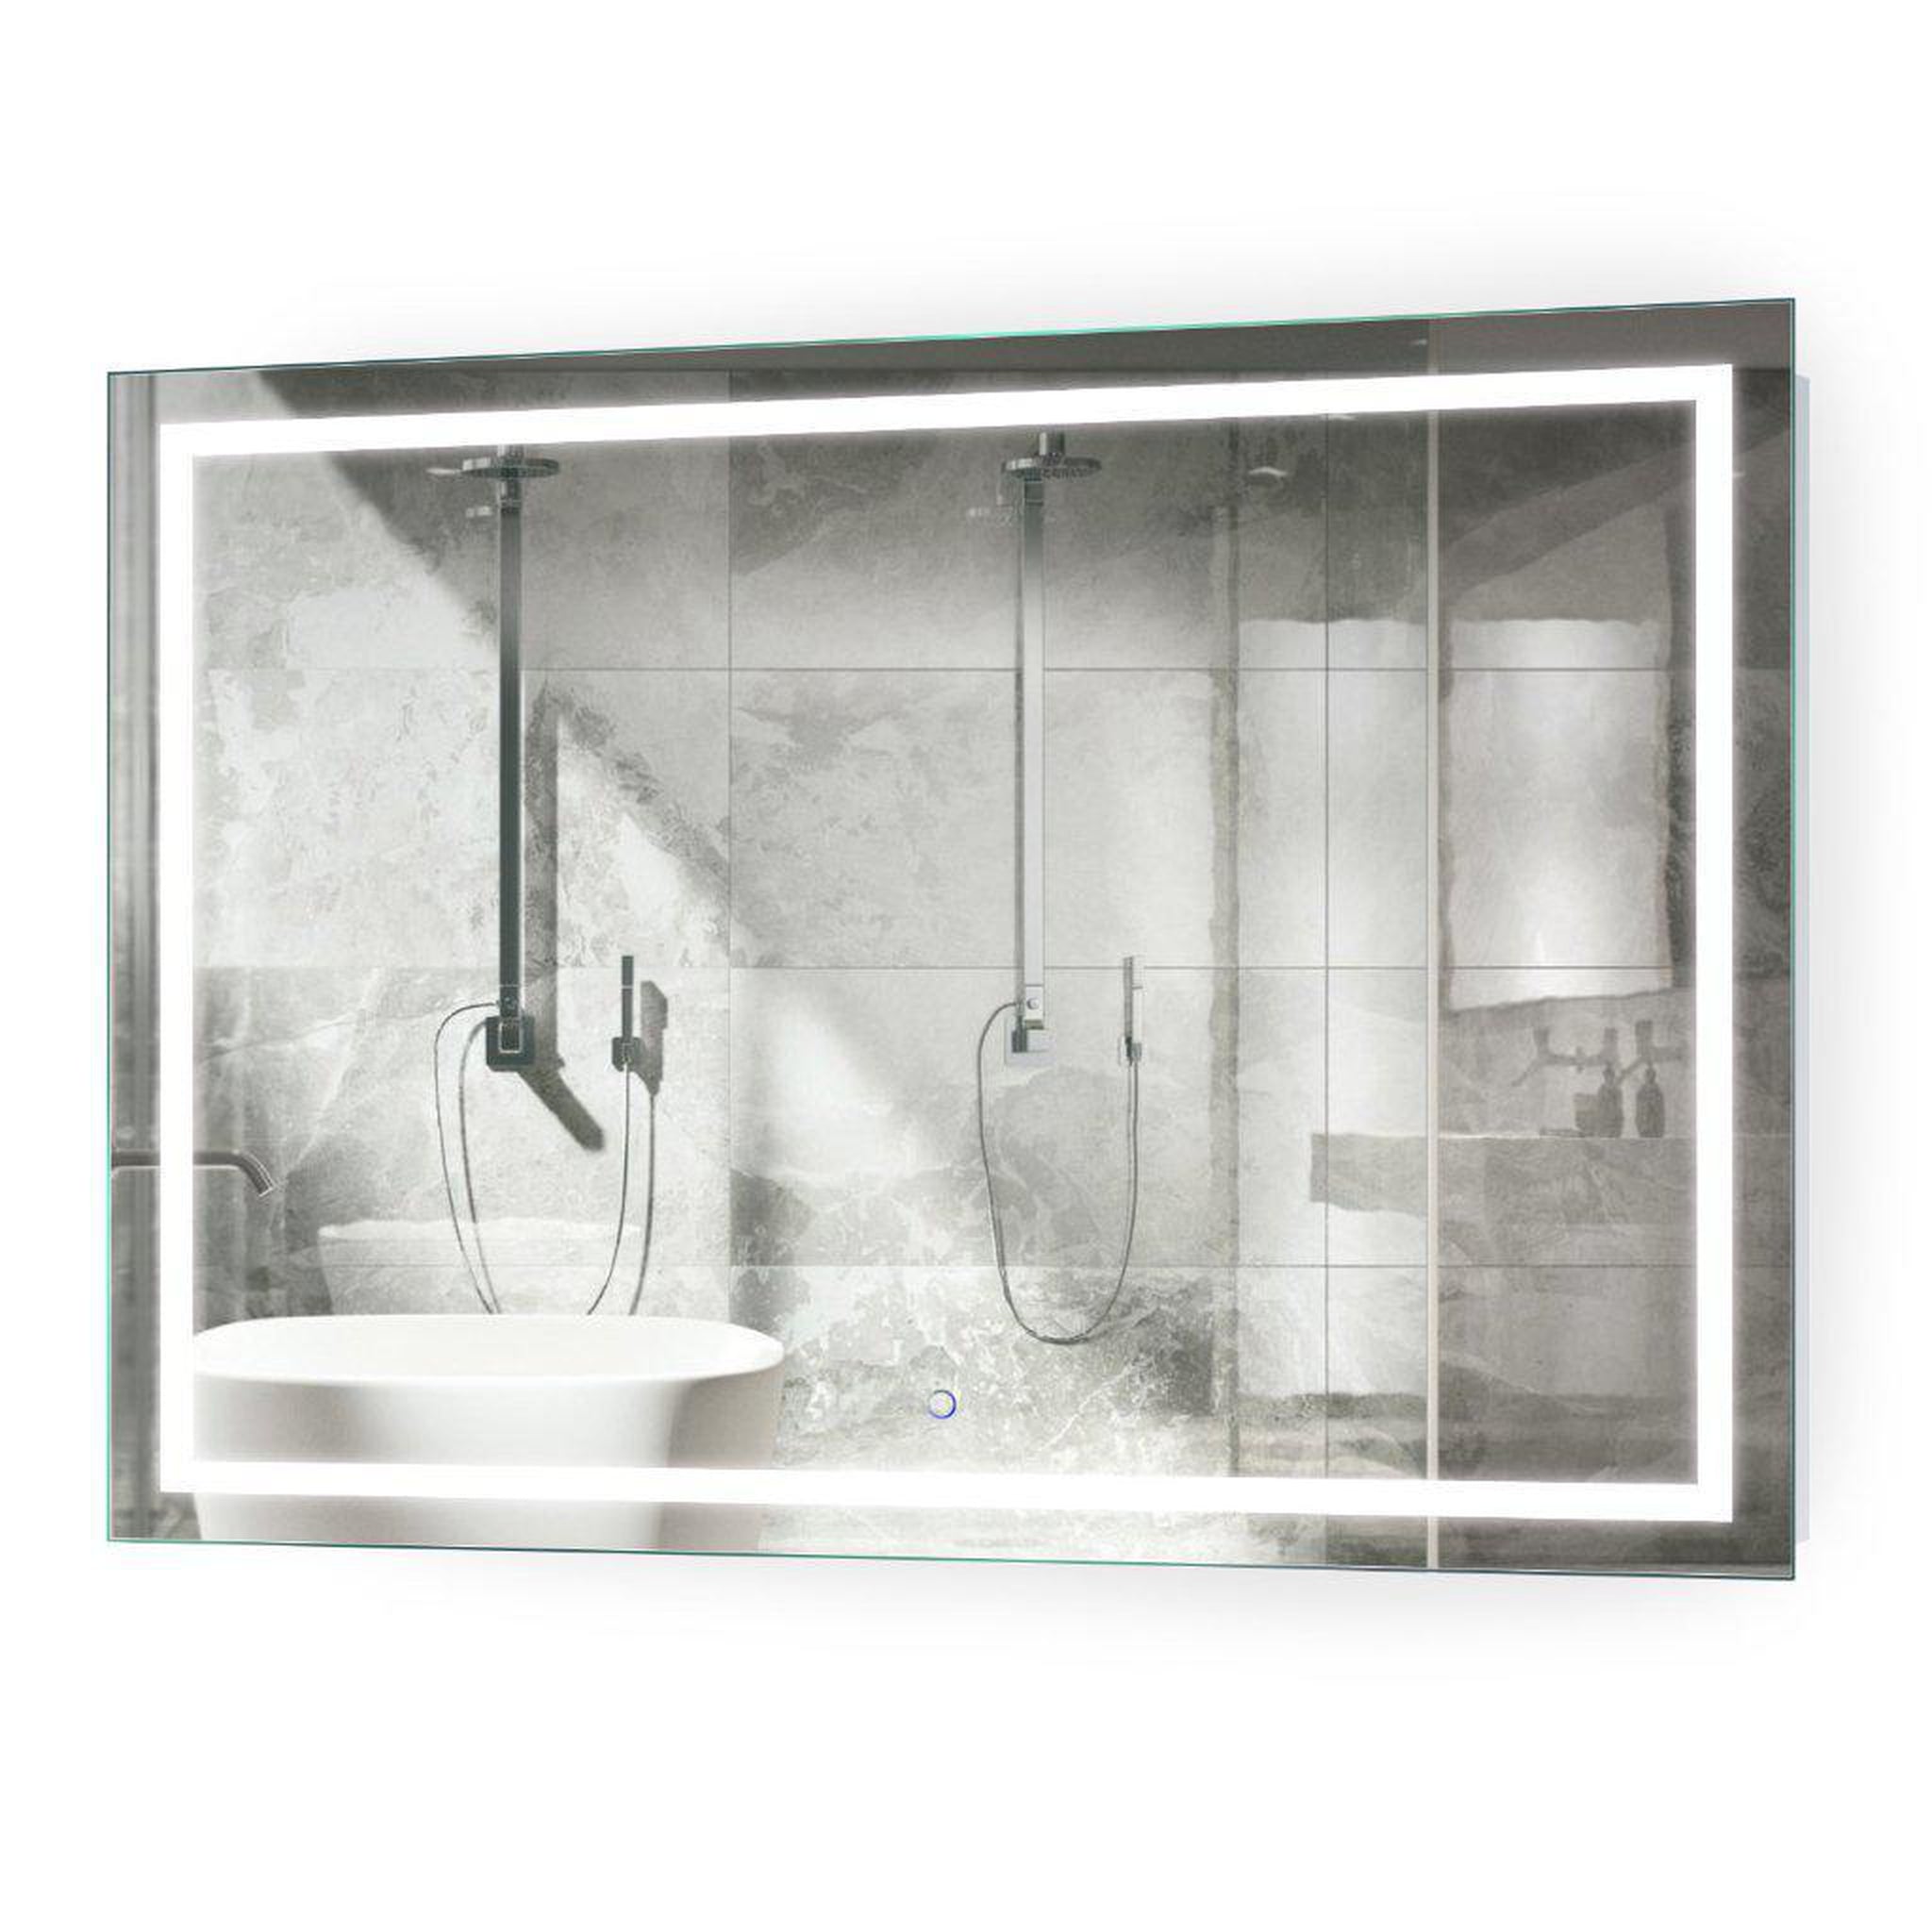 Krugg Reflections, Krugg Reflections Icon 48” x 36” 5000K Rectangular Wall-Mounted Illuminated Silver Backed LED  Mirror With Built-in Defogger and Touch Sensor On/Off Built-in Dimmer